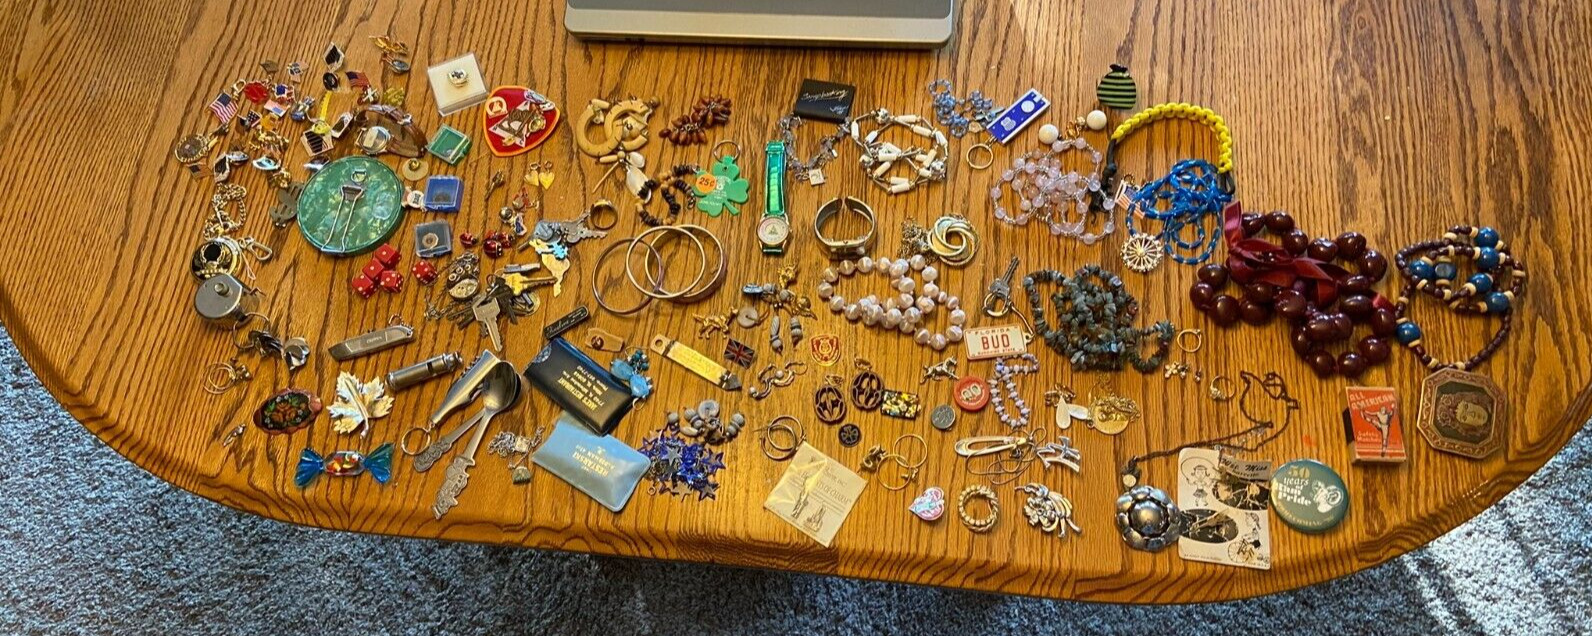 Large Vintage Junk Drawer Lot , Crafter Jewelery Lot. 4 lbs 6 Oz.